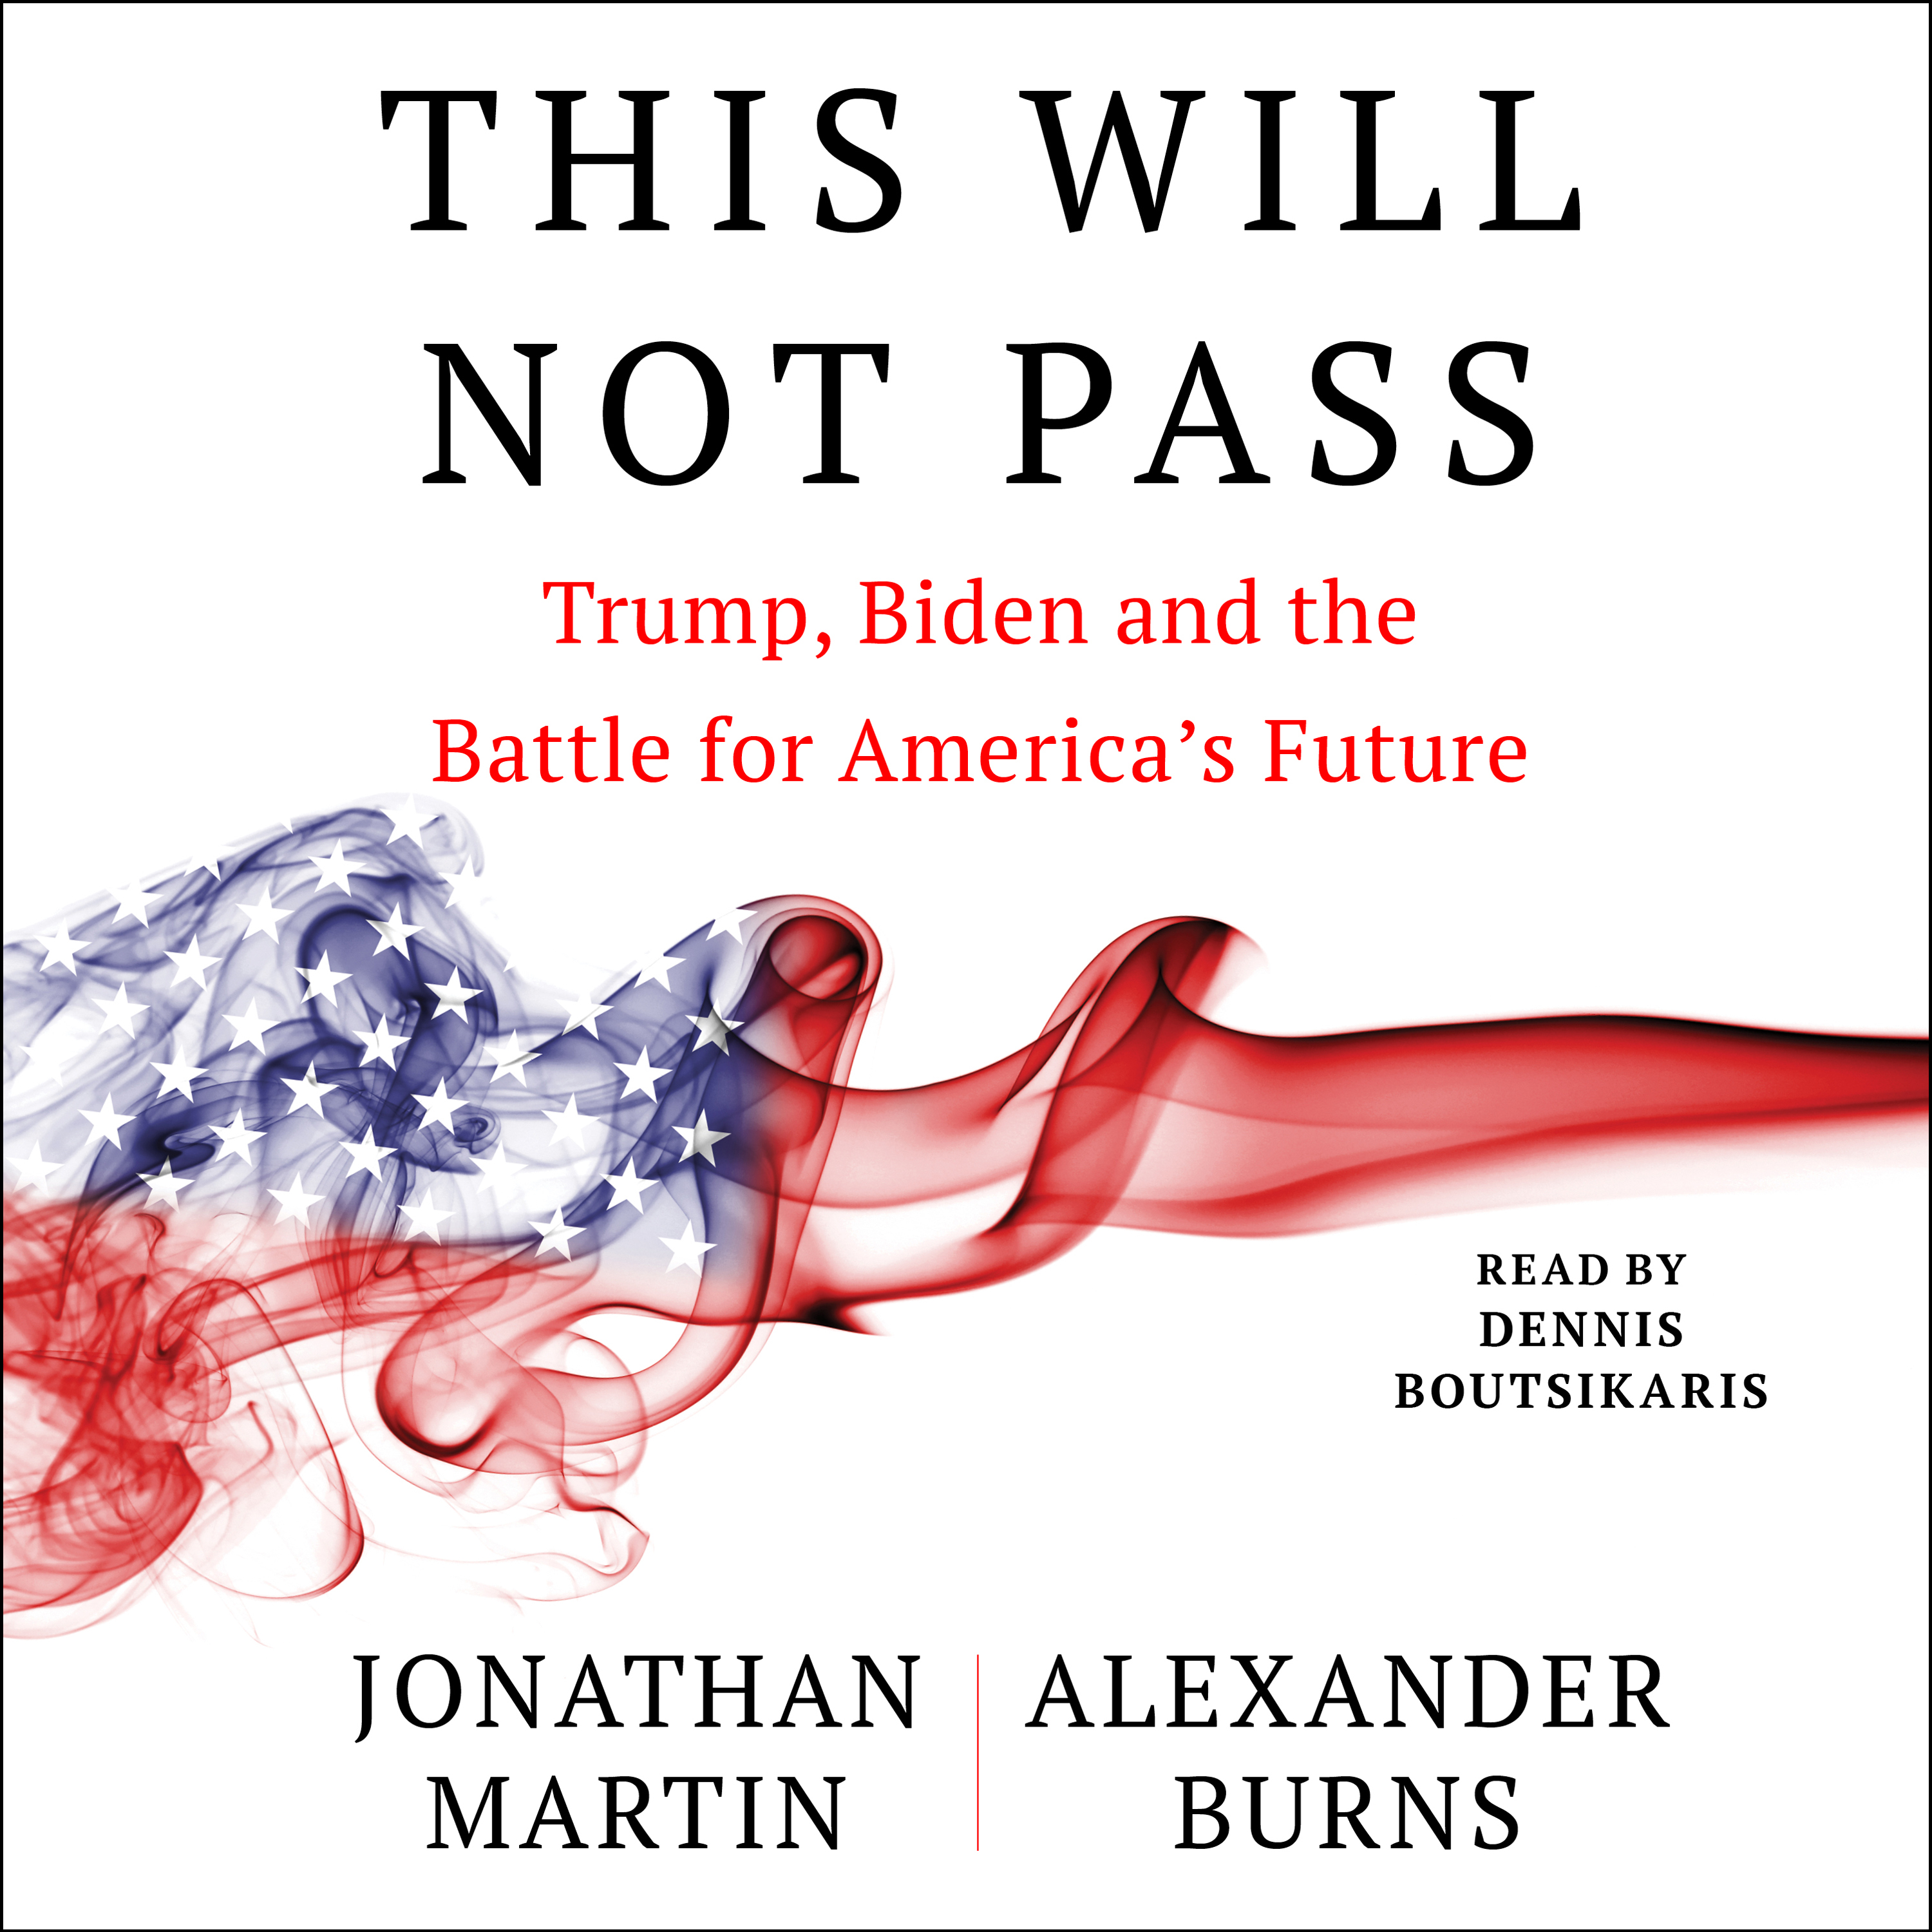 Jonathan Martin, Alexander Burns - This Will Not Pass (Trump, Biden, and the Battle for America's Future) Audio Book Download